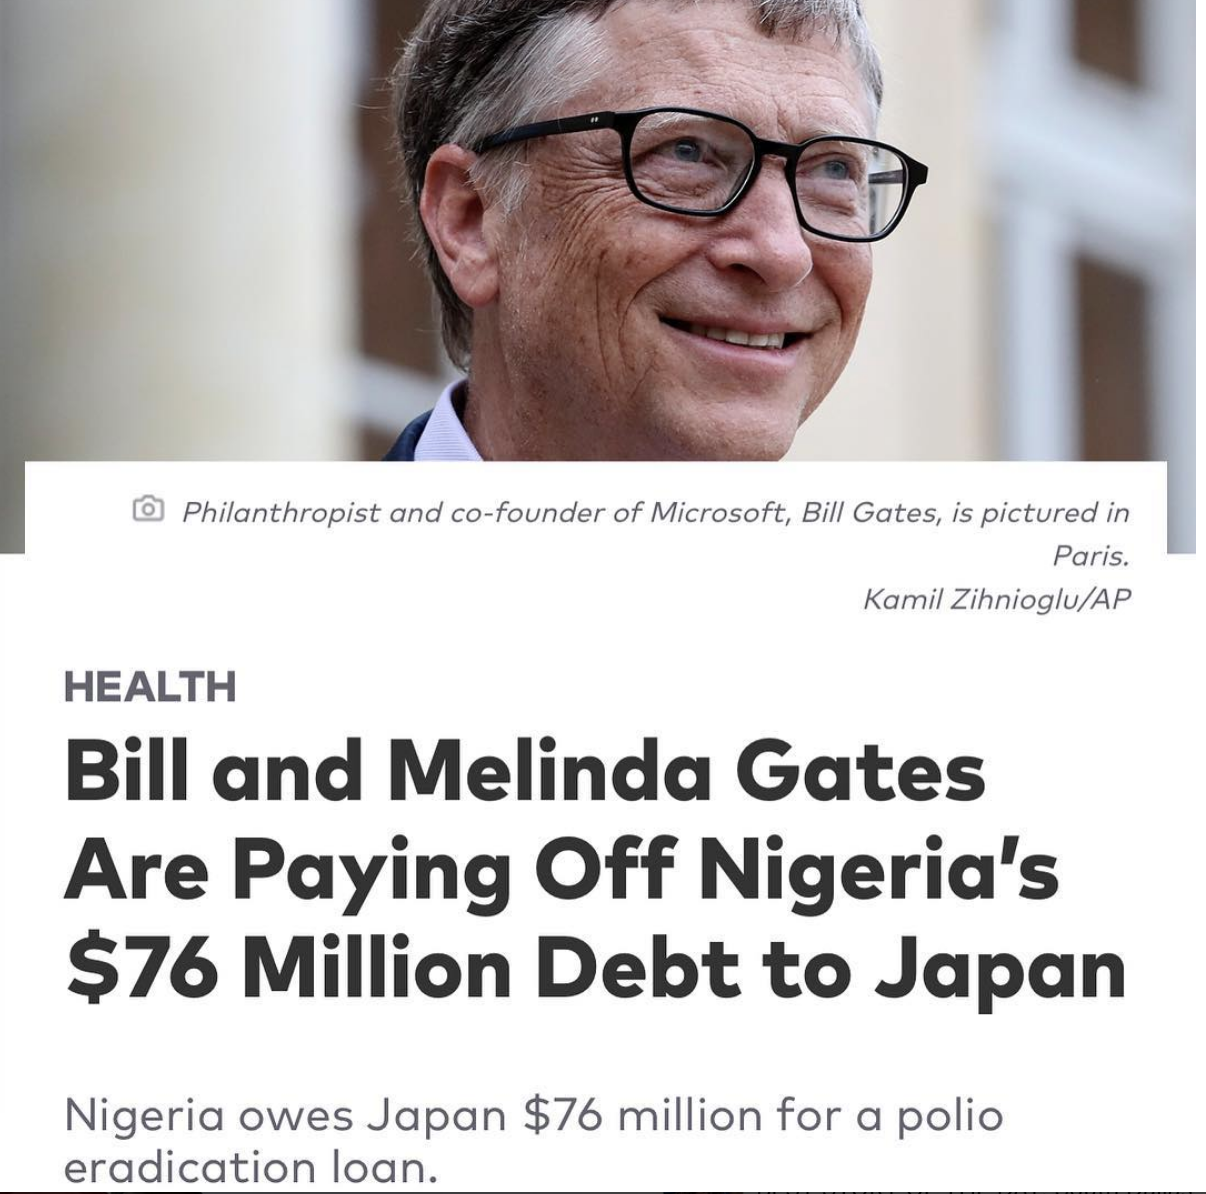 am nigerian prince - @ Philanthropist and cofounder of Microsoft, Bill Gates, is pictured in Paris. Kamil ZihniogluAp Health Bill and Melinda Gates Are Paying Off Nigeria's $76 Million Debt to Japan Nigeria owes Japan $76 million for a polio eradication l